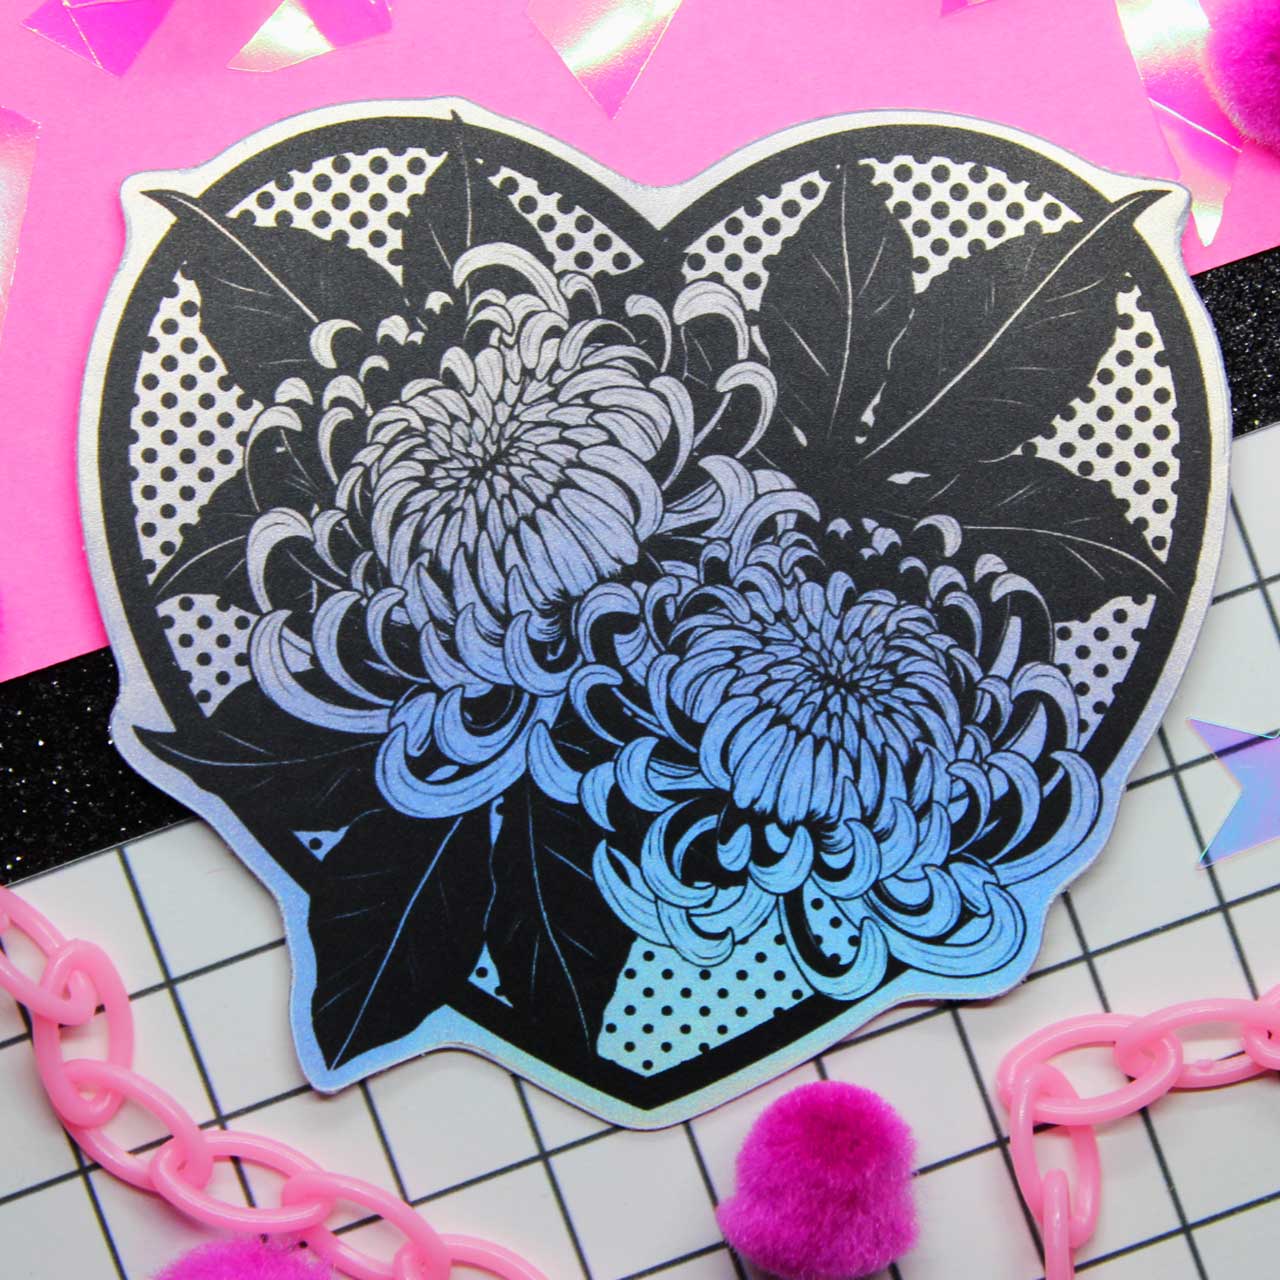 Aesthetic Chrysanthemum Sticker with black heart frame and polkadot background